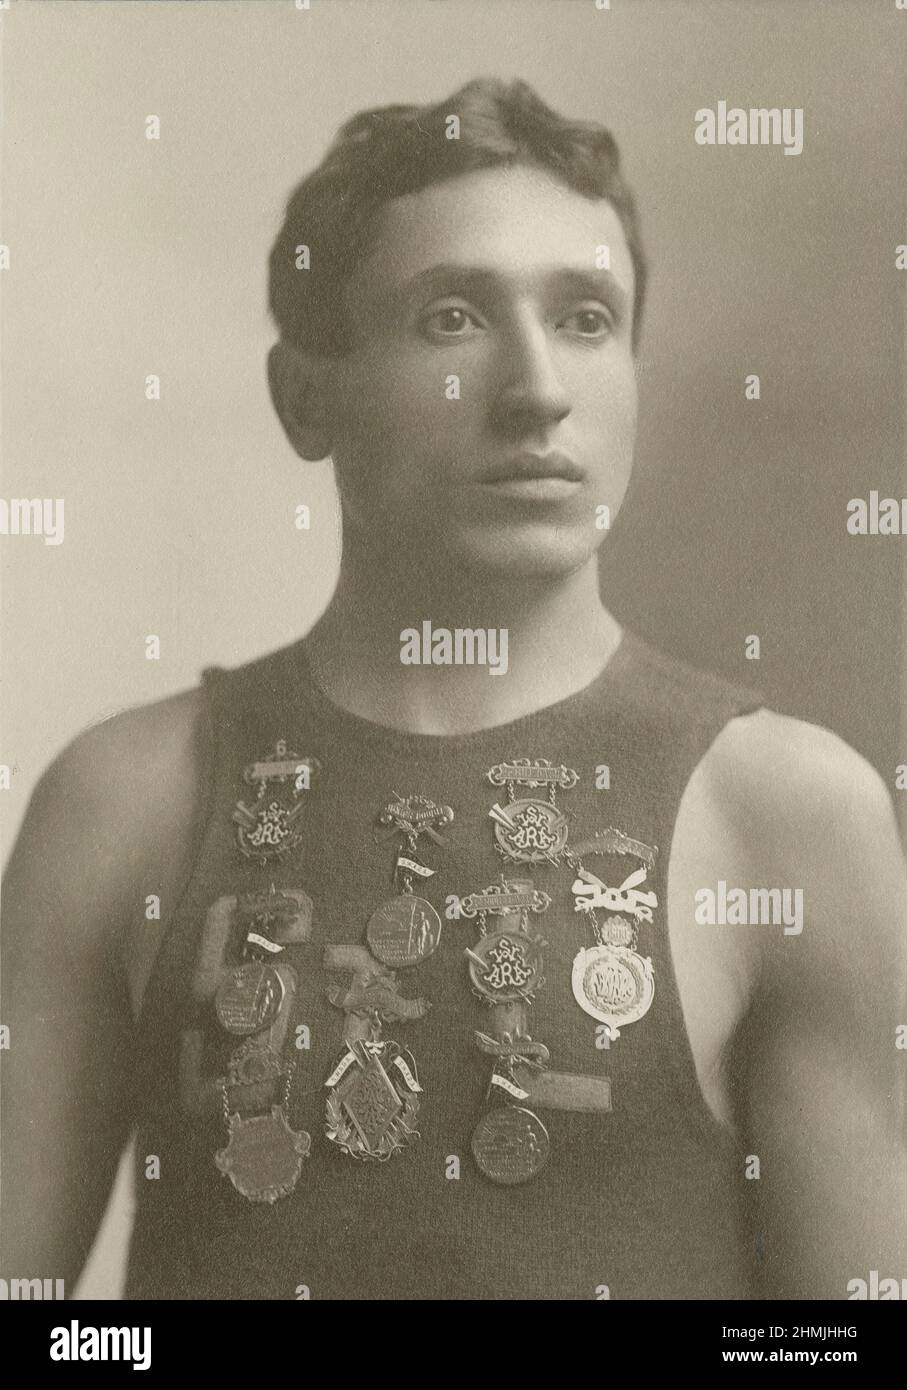 Antique circa 1900 photograph of a young man wearing a St. Louis top with medals pinned on his chest from the Southwestern Amateur Rowing Association. SOURCE: ORIGINAL CABINET CARD PHOTOGRAPH Stock Photo